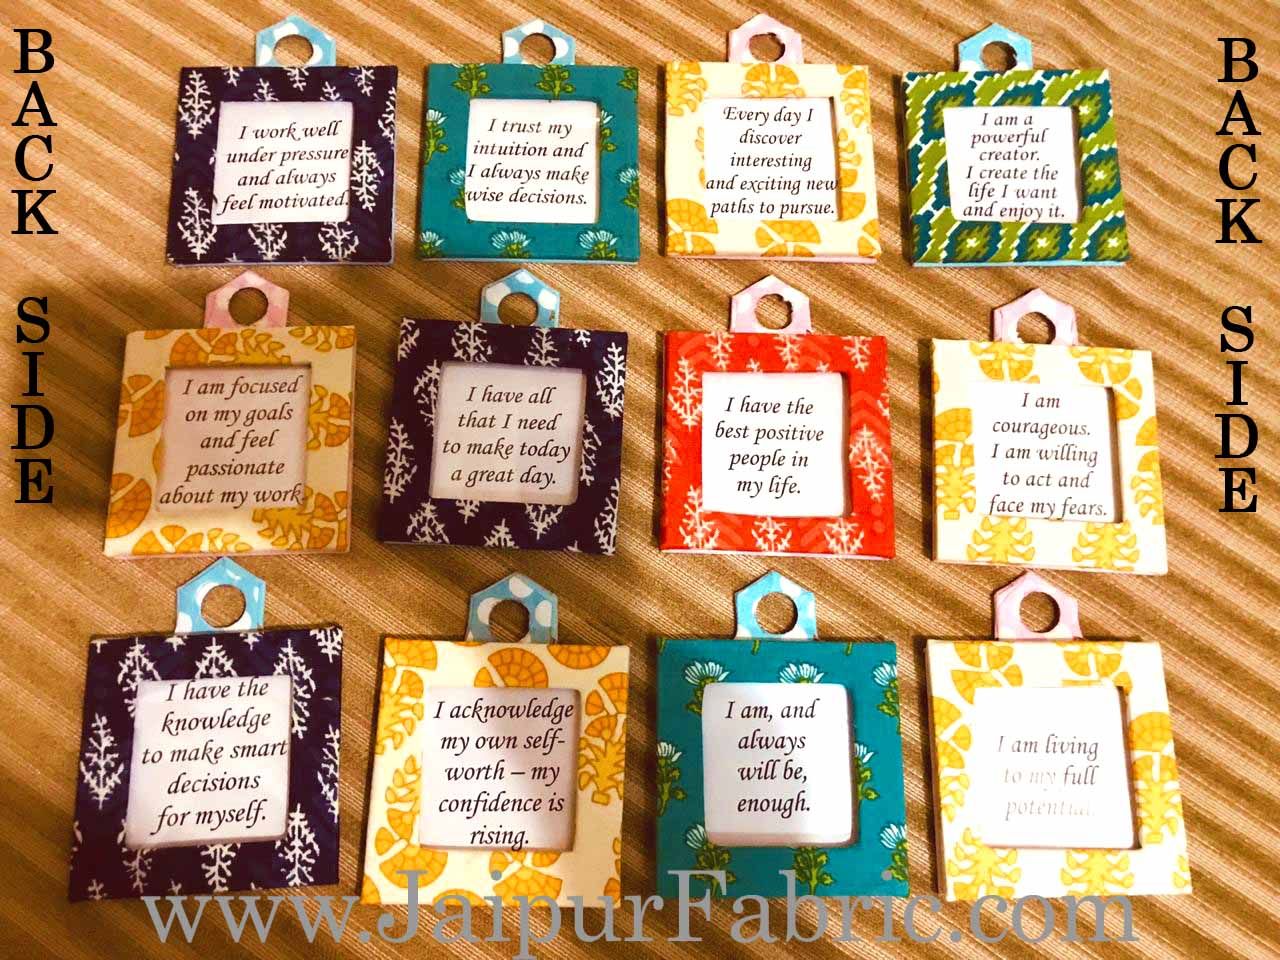 Fabric Calendar with Daily Positive Affirmations